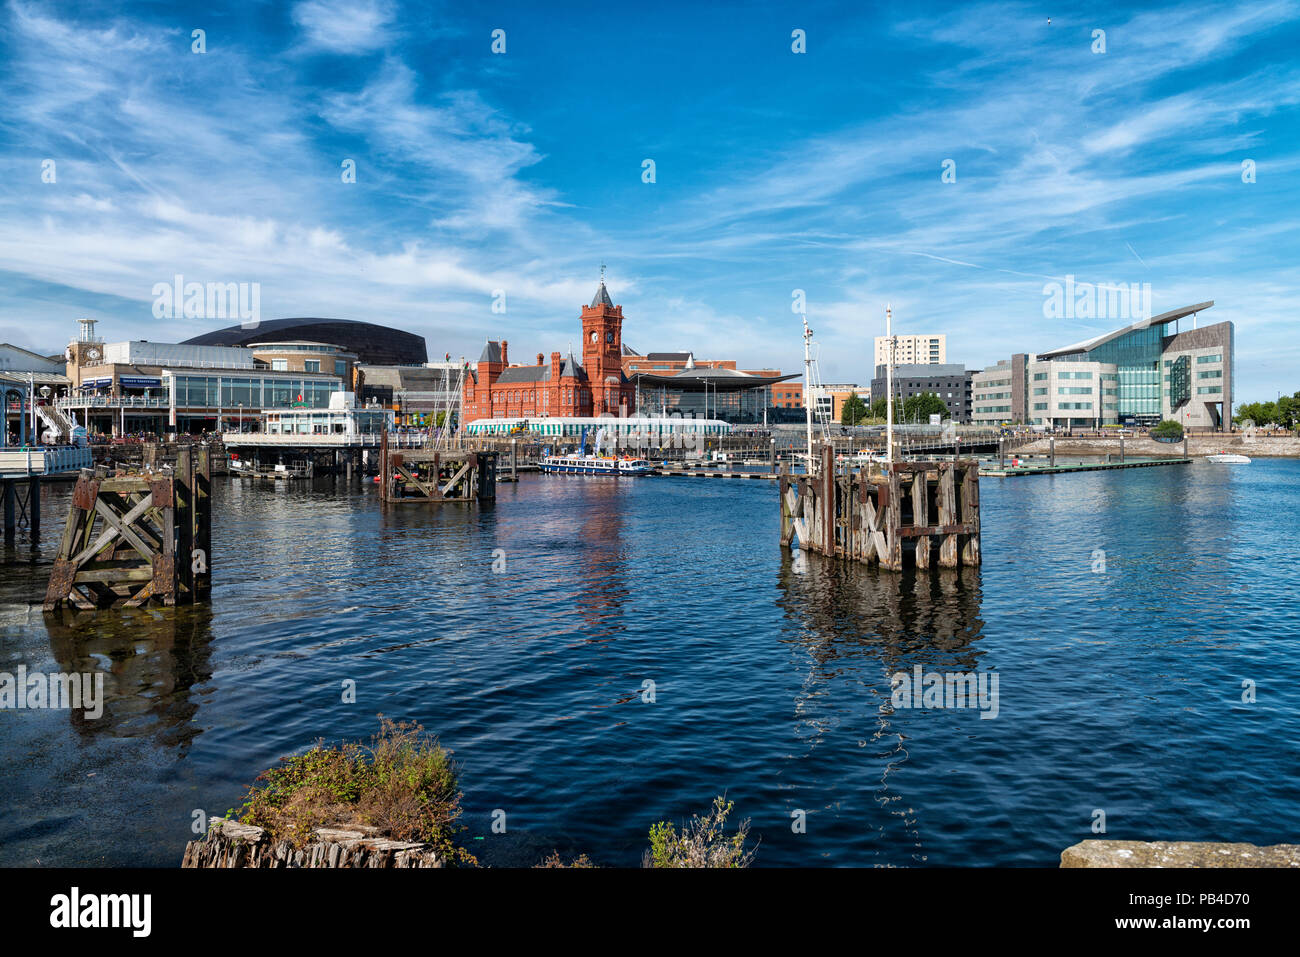 Mermaid Quay with left to right, The Wales Millennium Centre, The Pierhead Building, The Senedd and The Atradius Building, Cardiff Bay, South Wales. Stock Photo